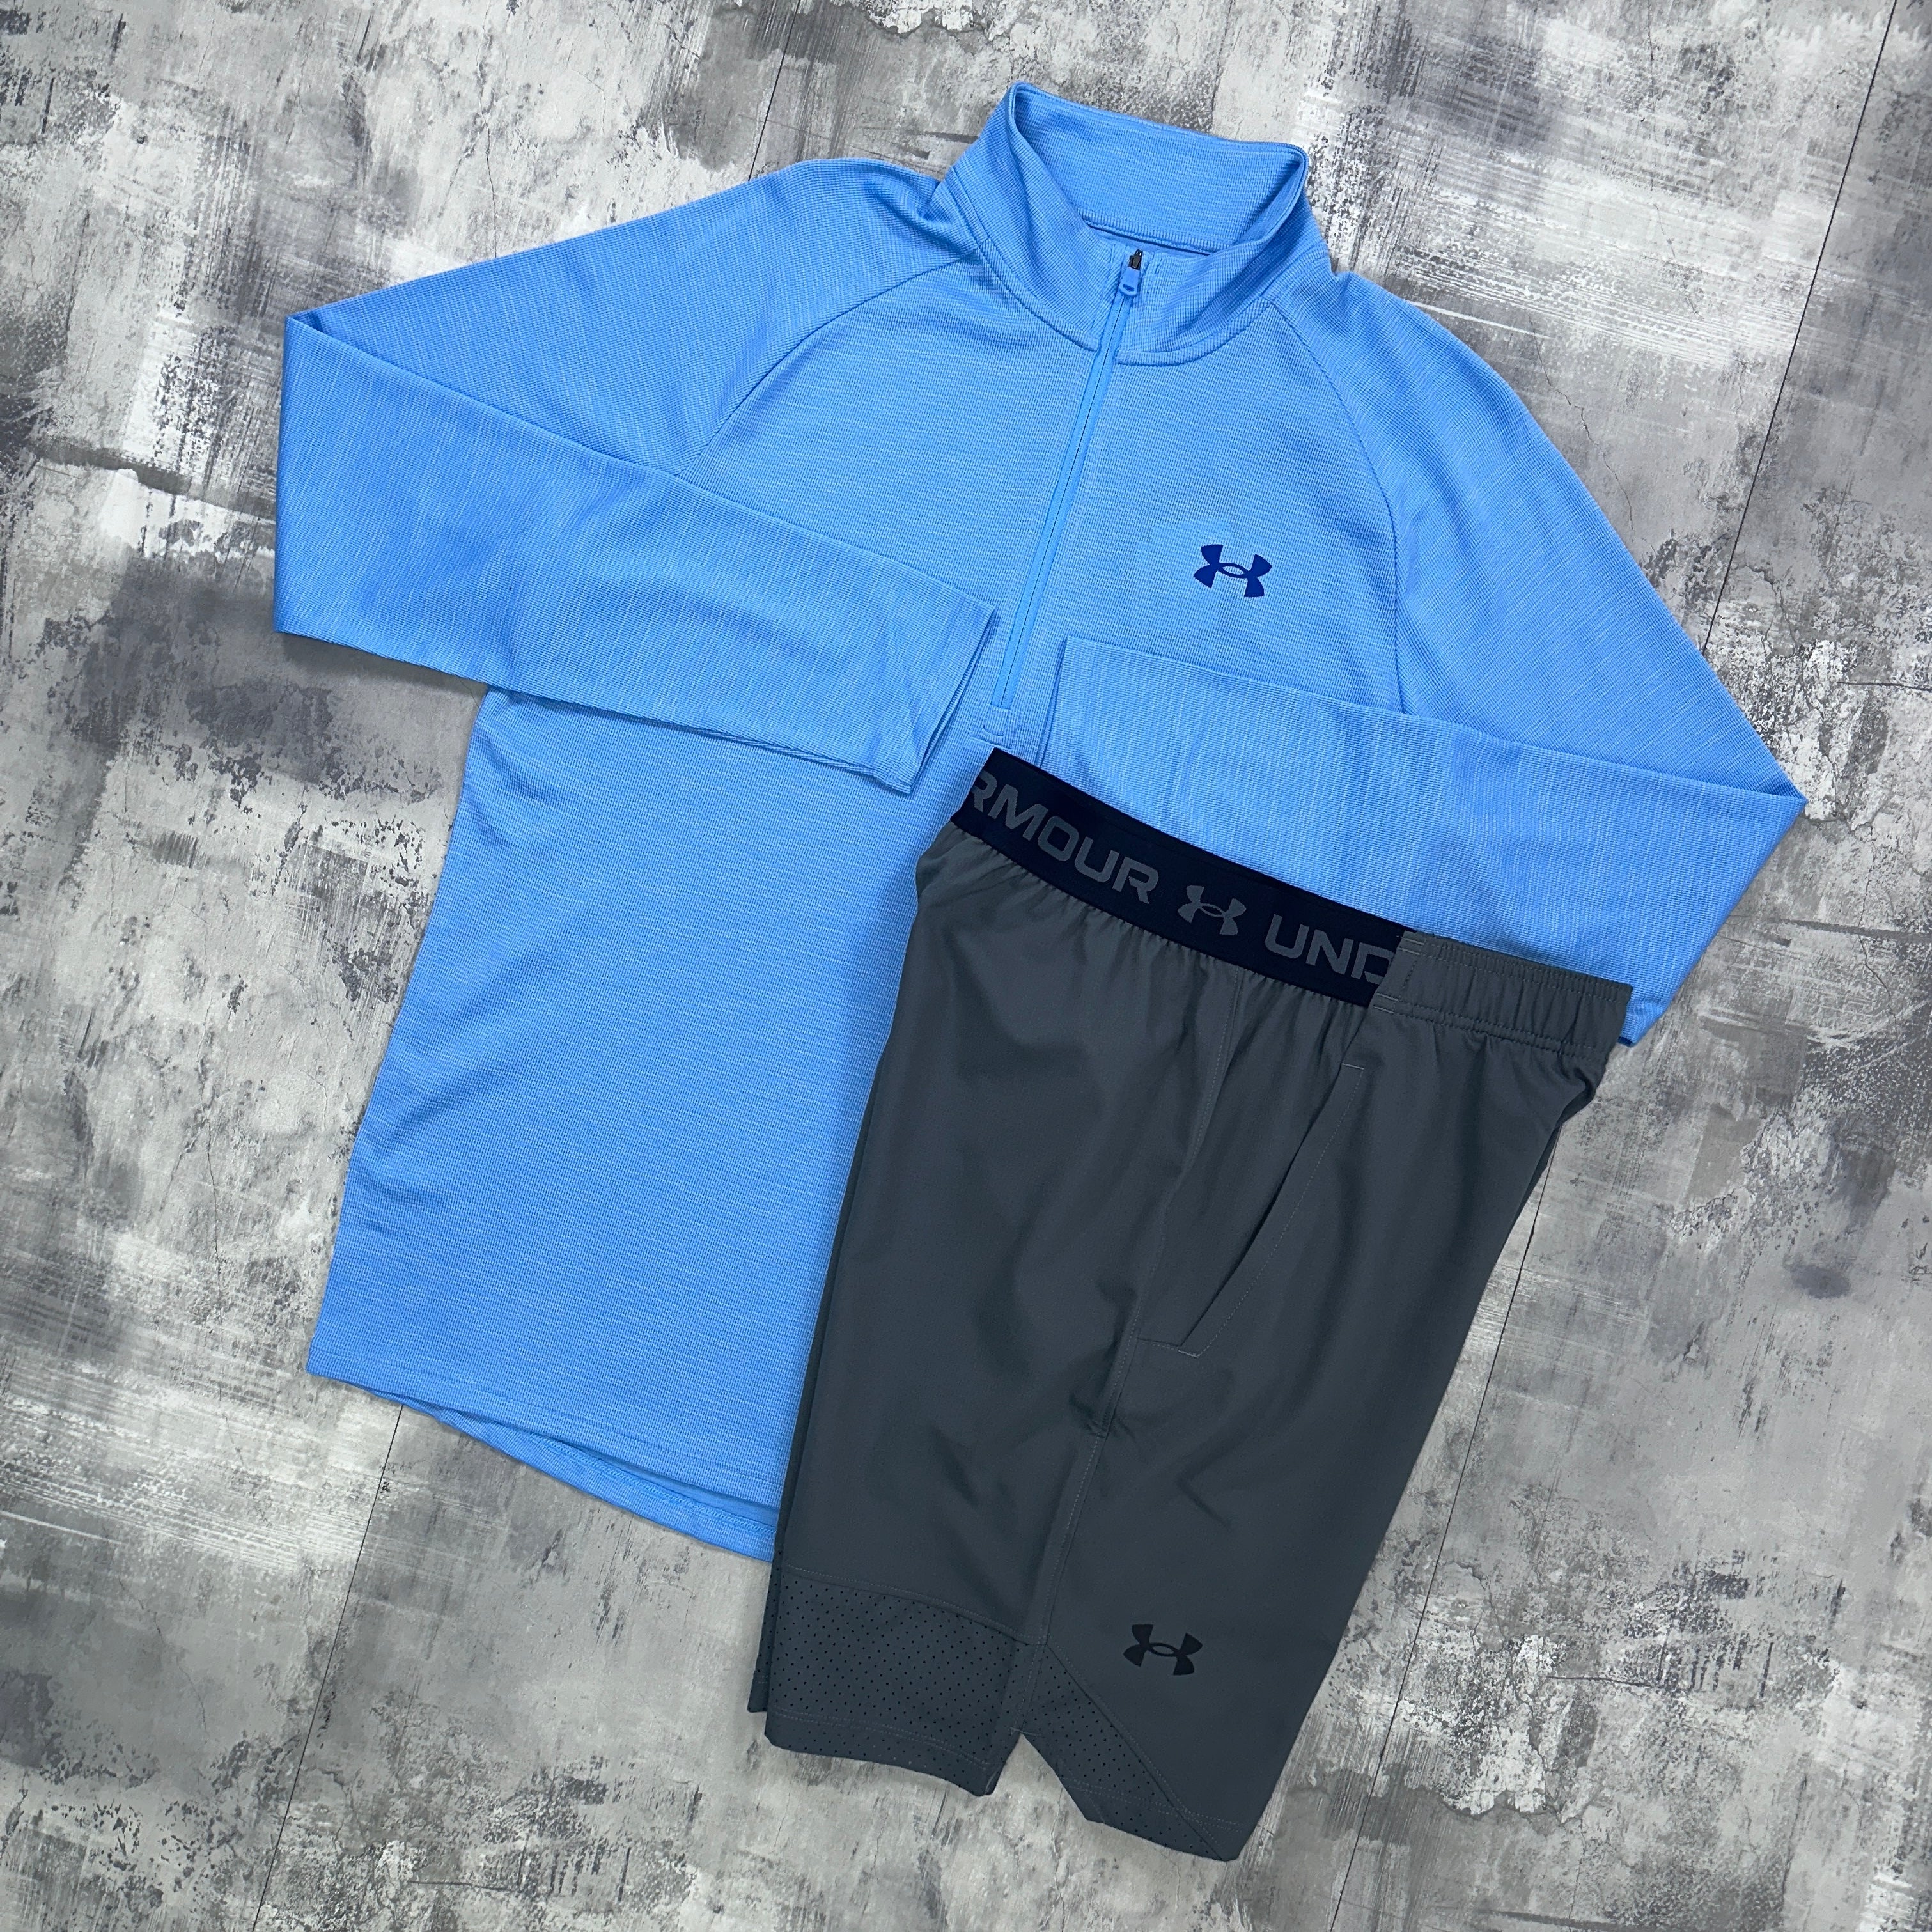 Under Armour Tech set Ice Blue - 1/2 zip and shorts